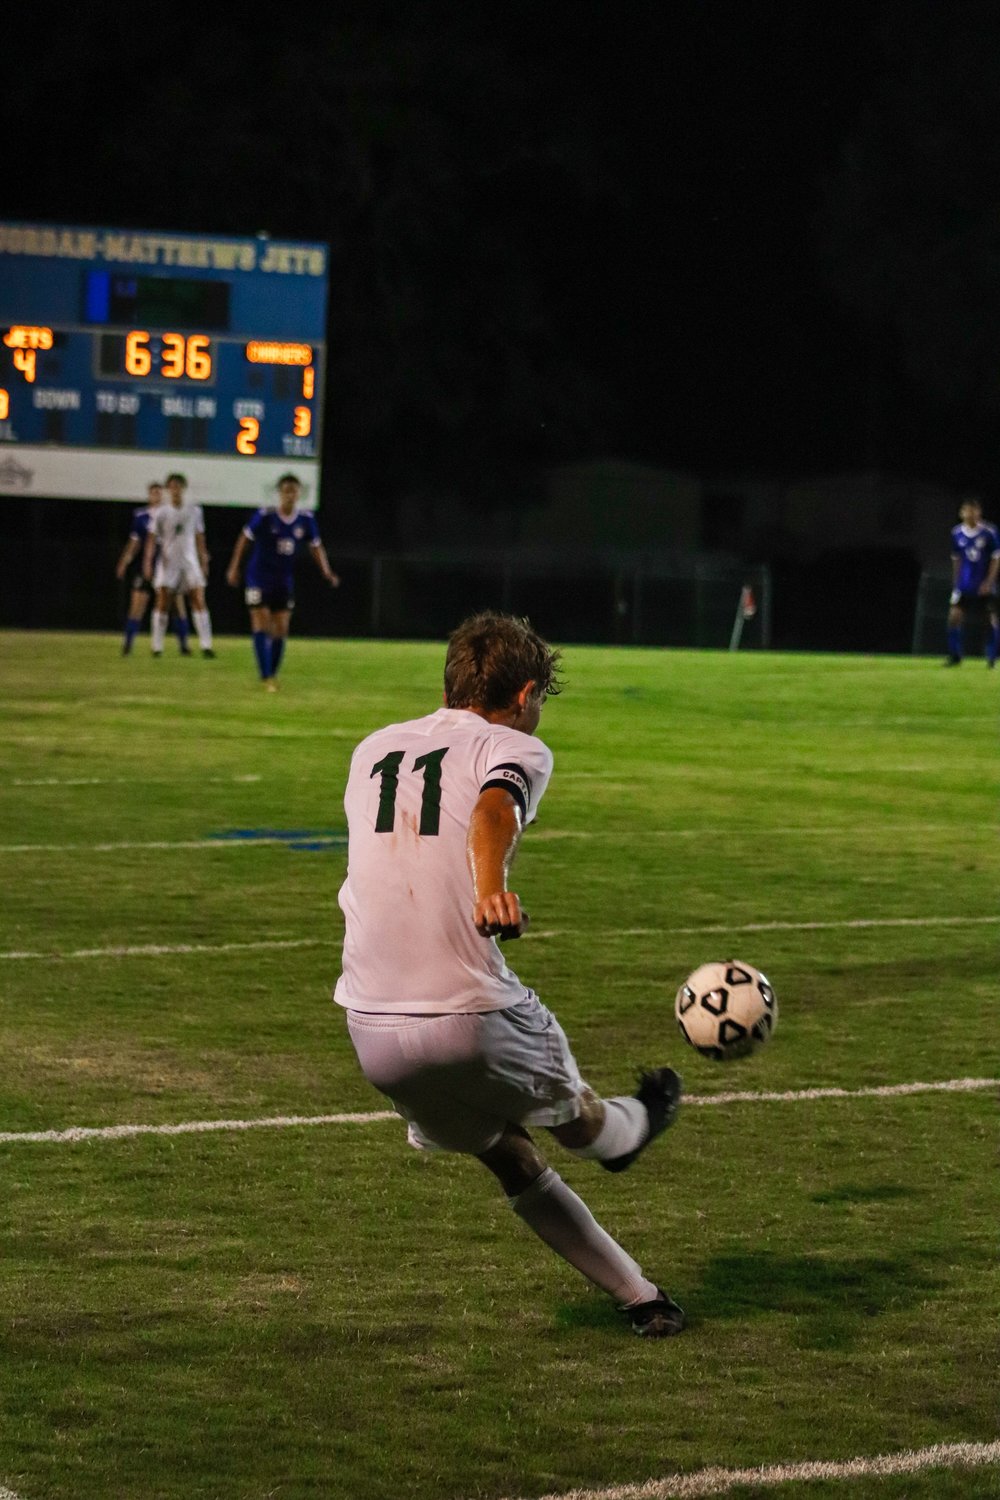 Northwood senior Adam Beaulieu slices the ball downfield in his team's 4-1 loss to Jordan-Matthews last Thursday in Siler City. The Chargers mustered only one goal on the night, which came in the first half.